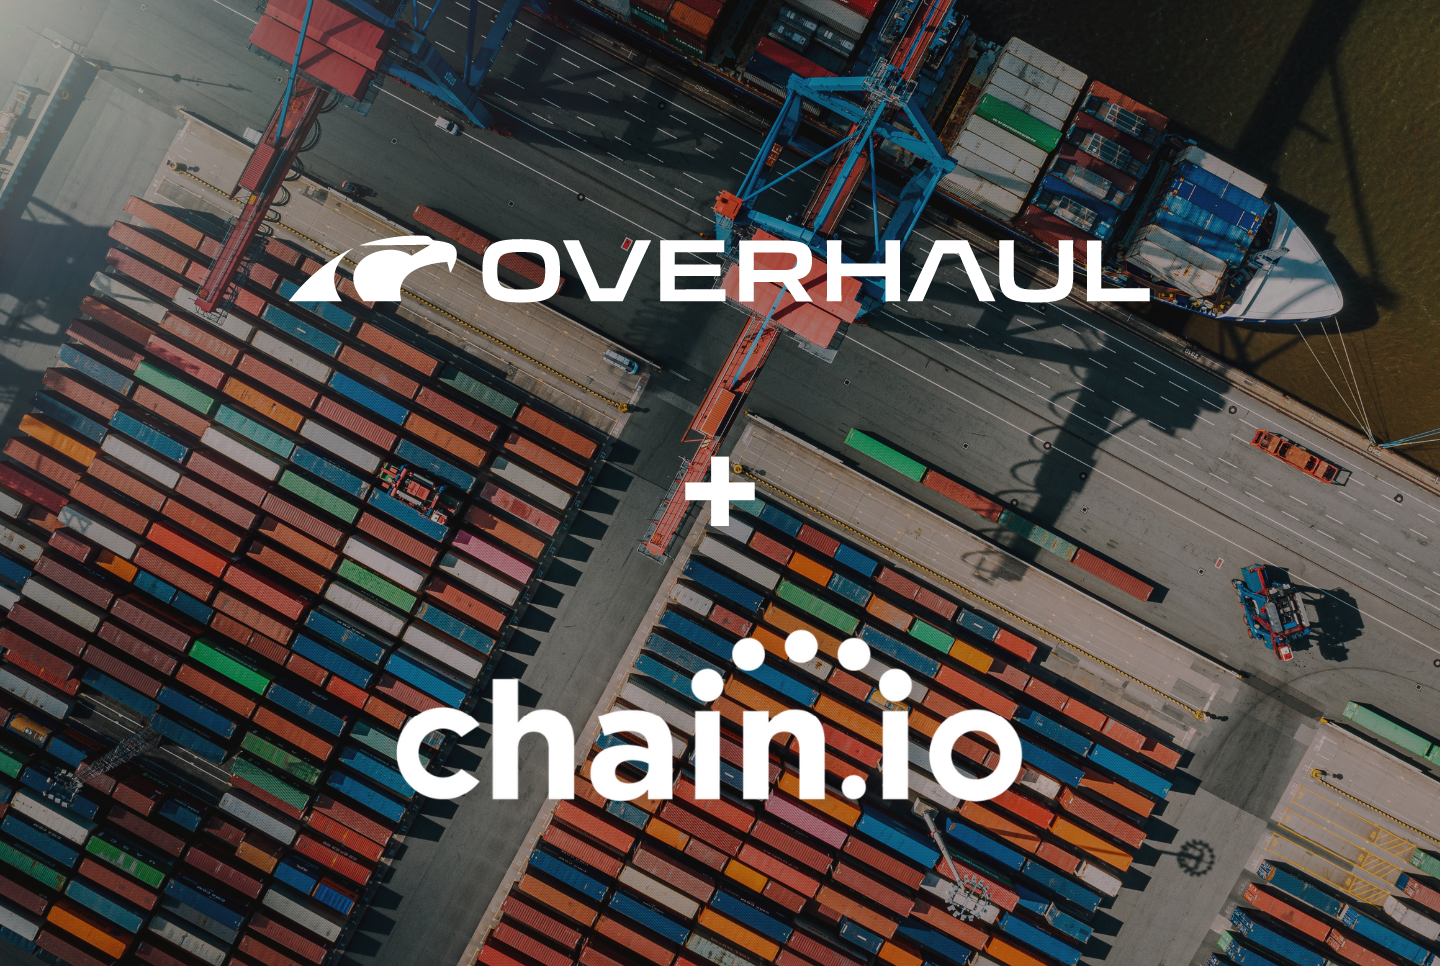 Overhaul and Chain.io bring supply chain visibility and integrations to freight forwarders and shippers